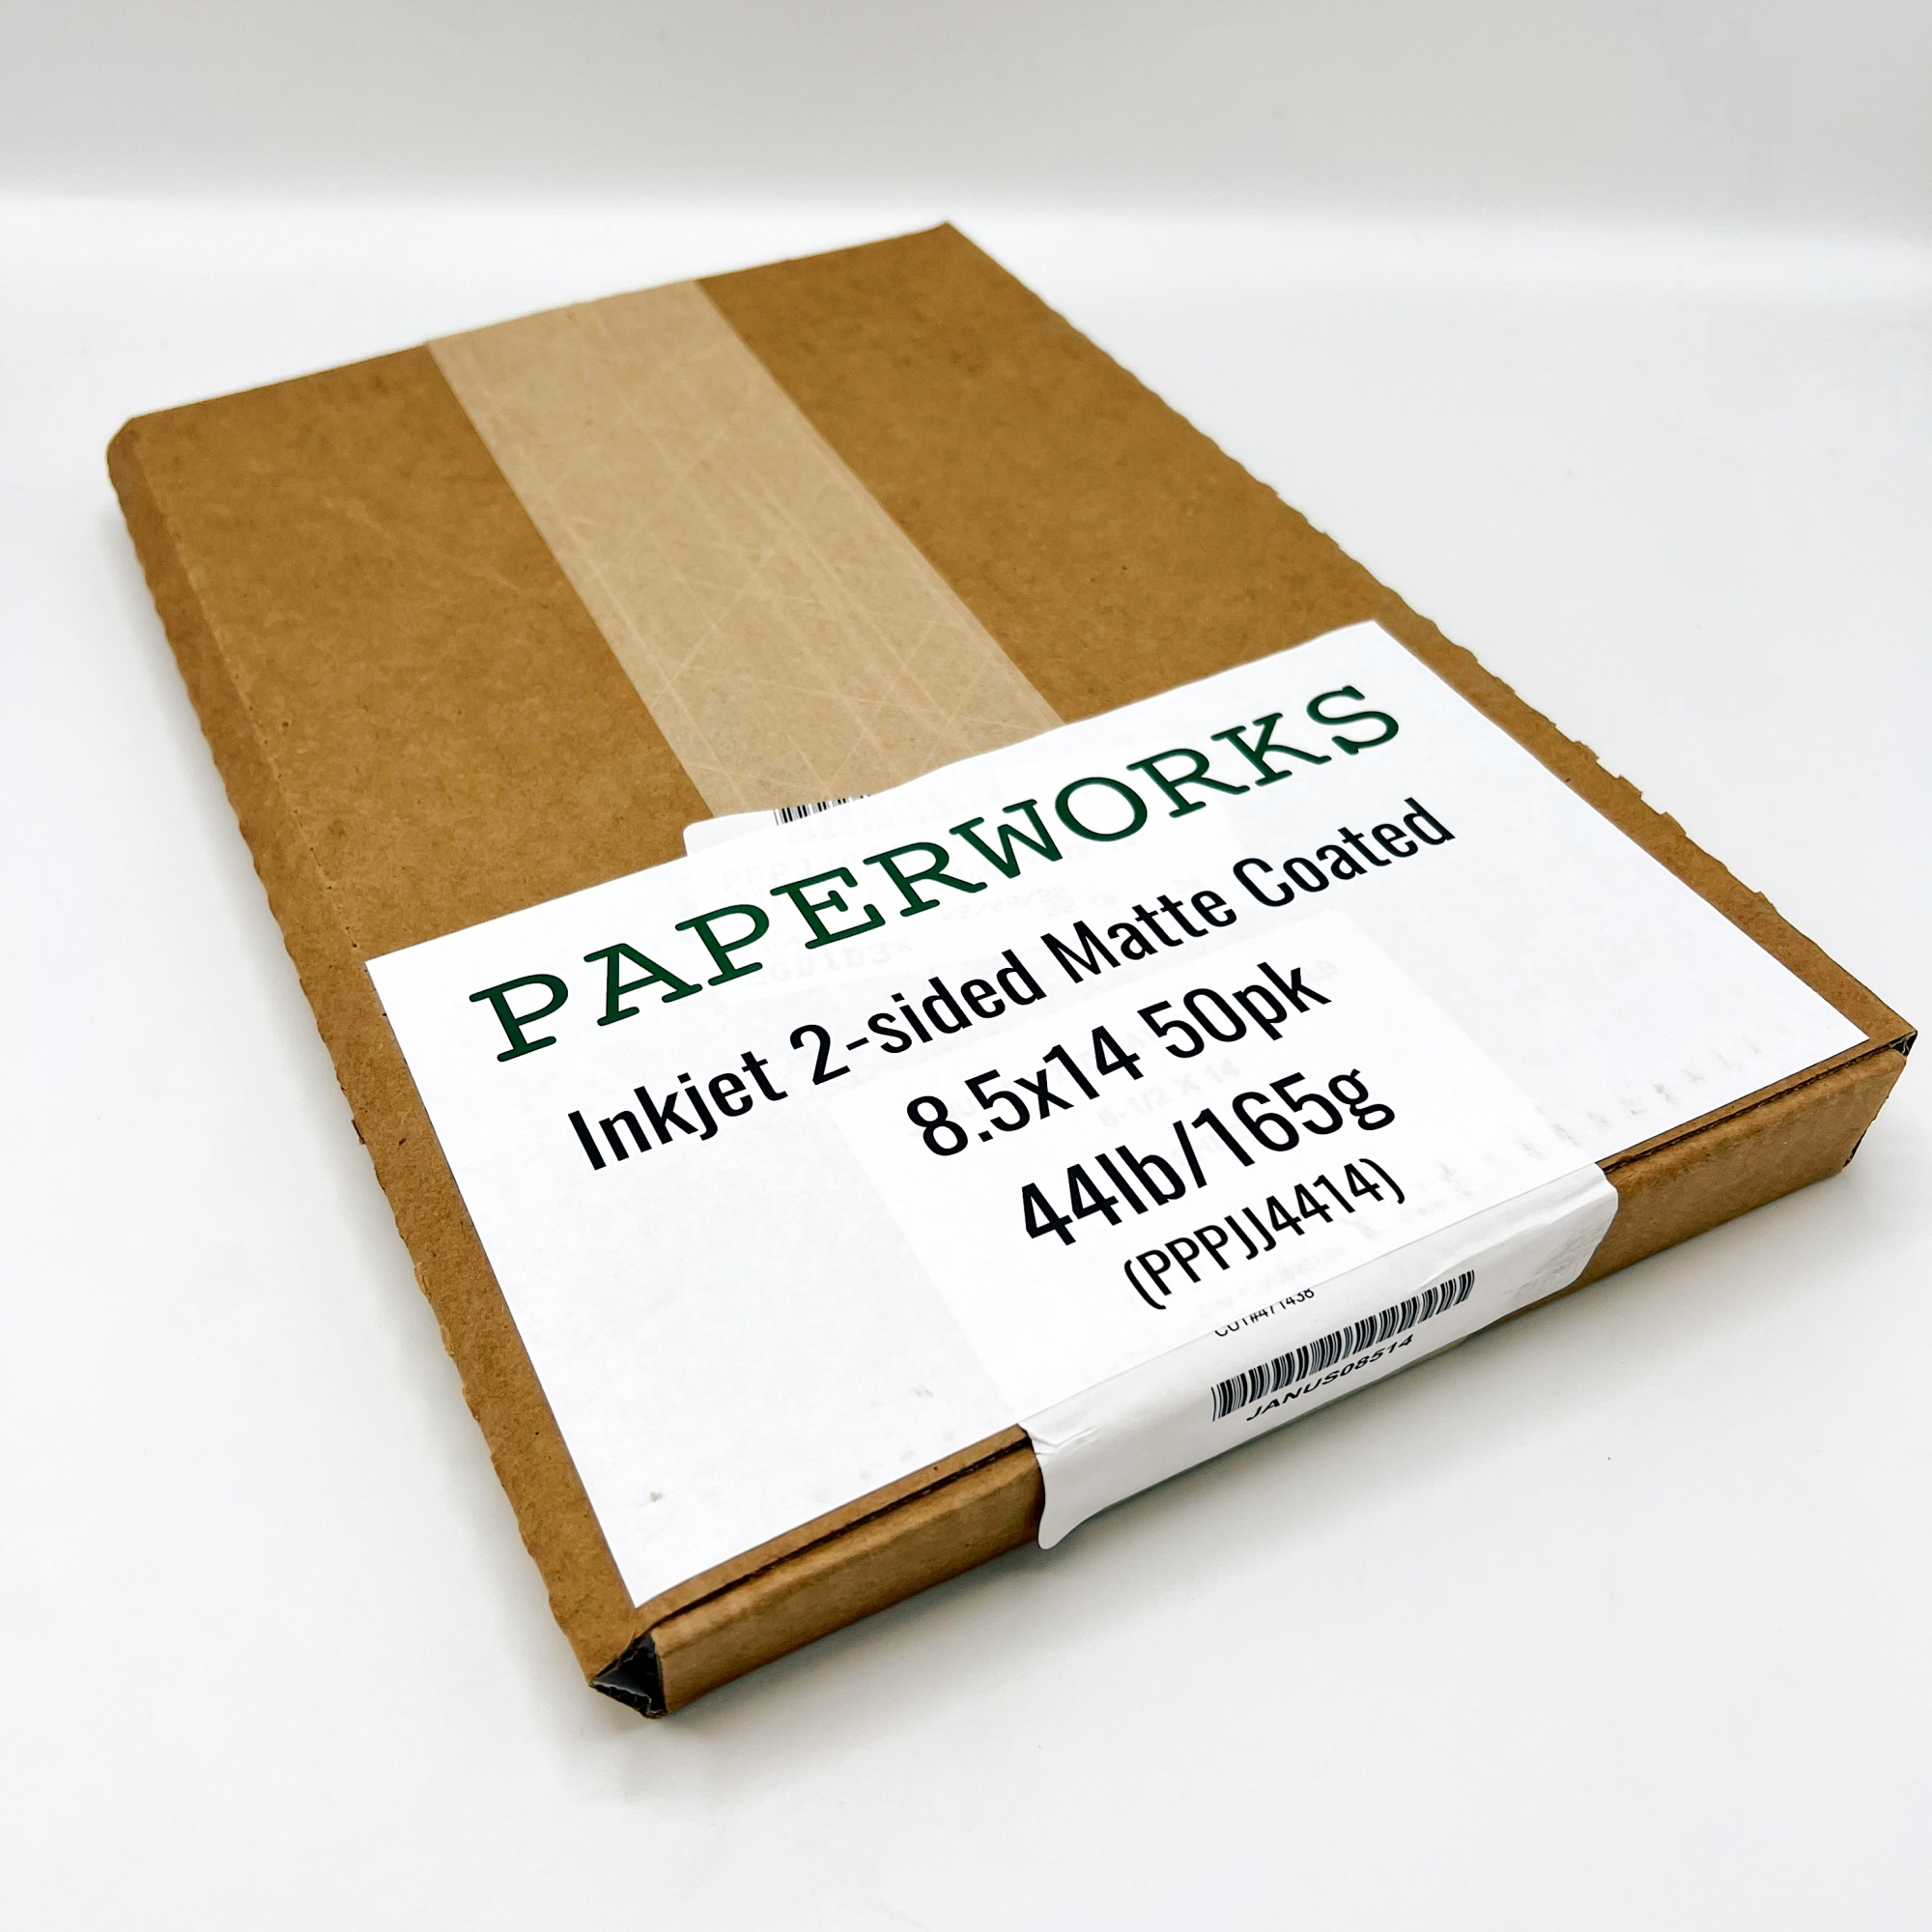 Basic WHITE (Lightweight) Card Stock Paper - 8.5 x 14 - 65lb Cover (176gsm)